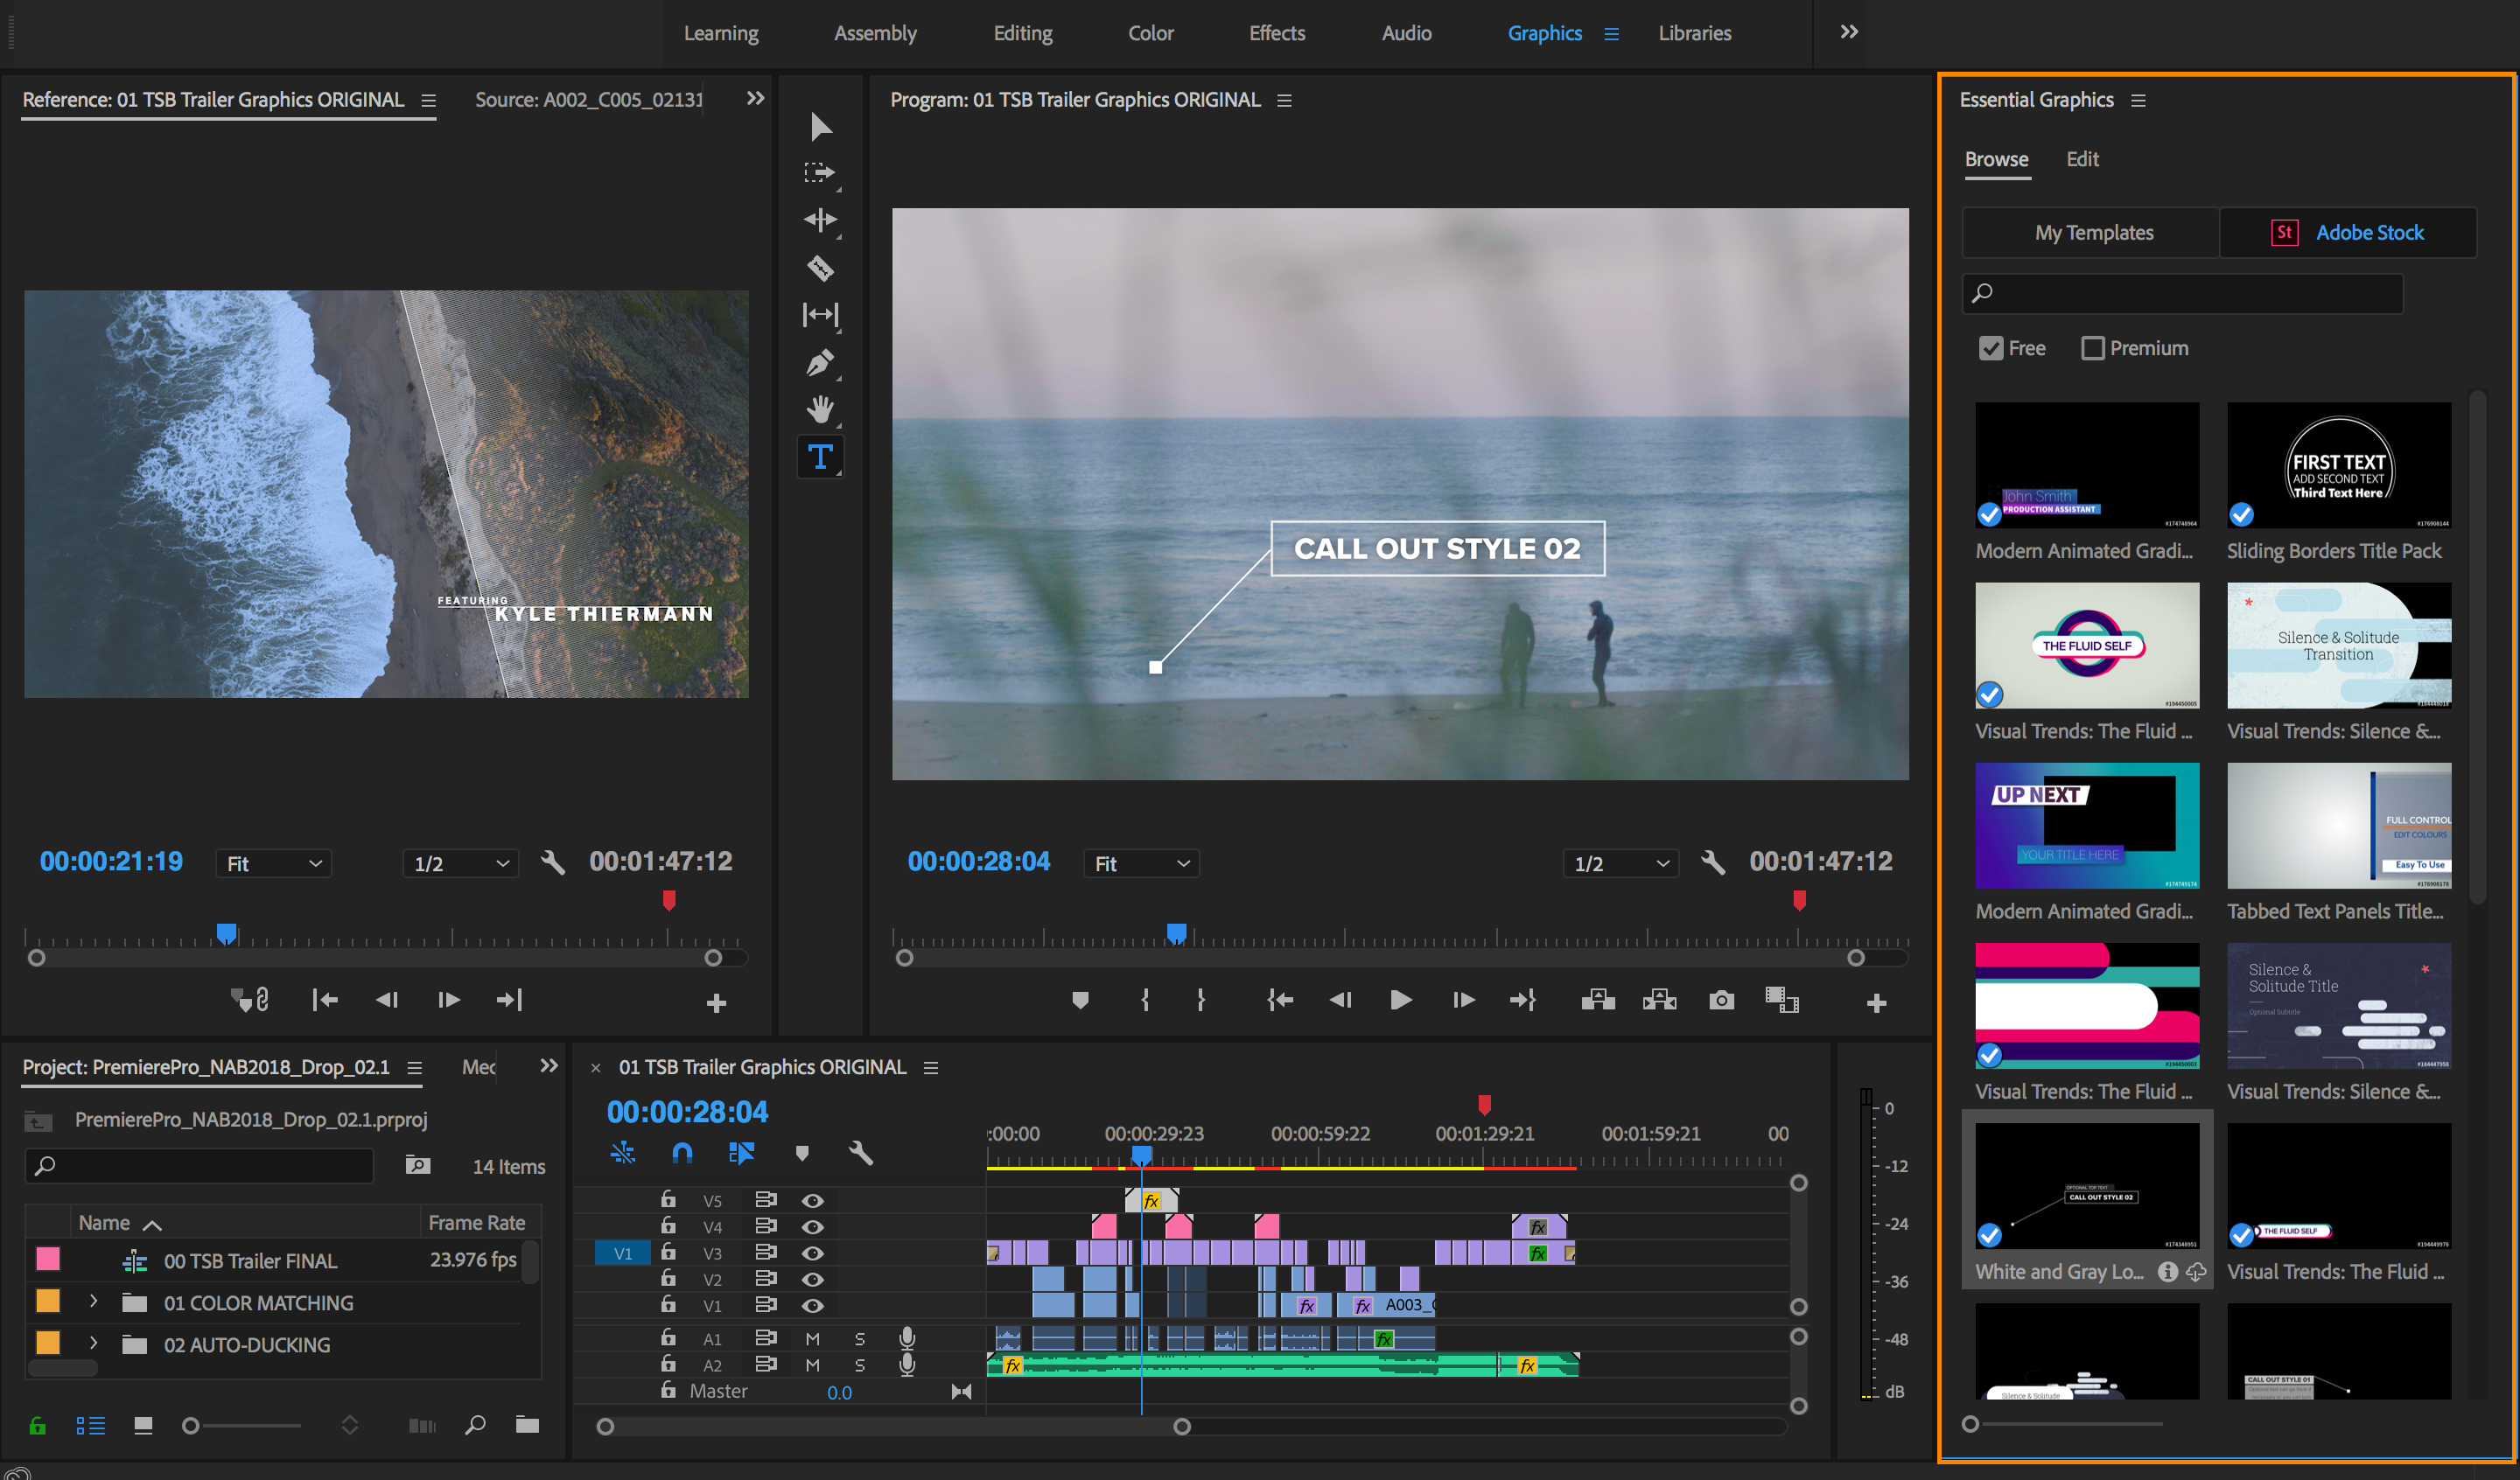 No Audio In Mts File Imported Into Adobe Premiere Pro Cc 2018 On Mac Os X 10.13